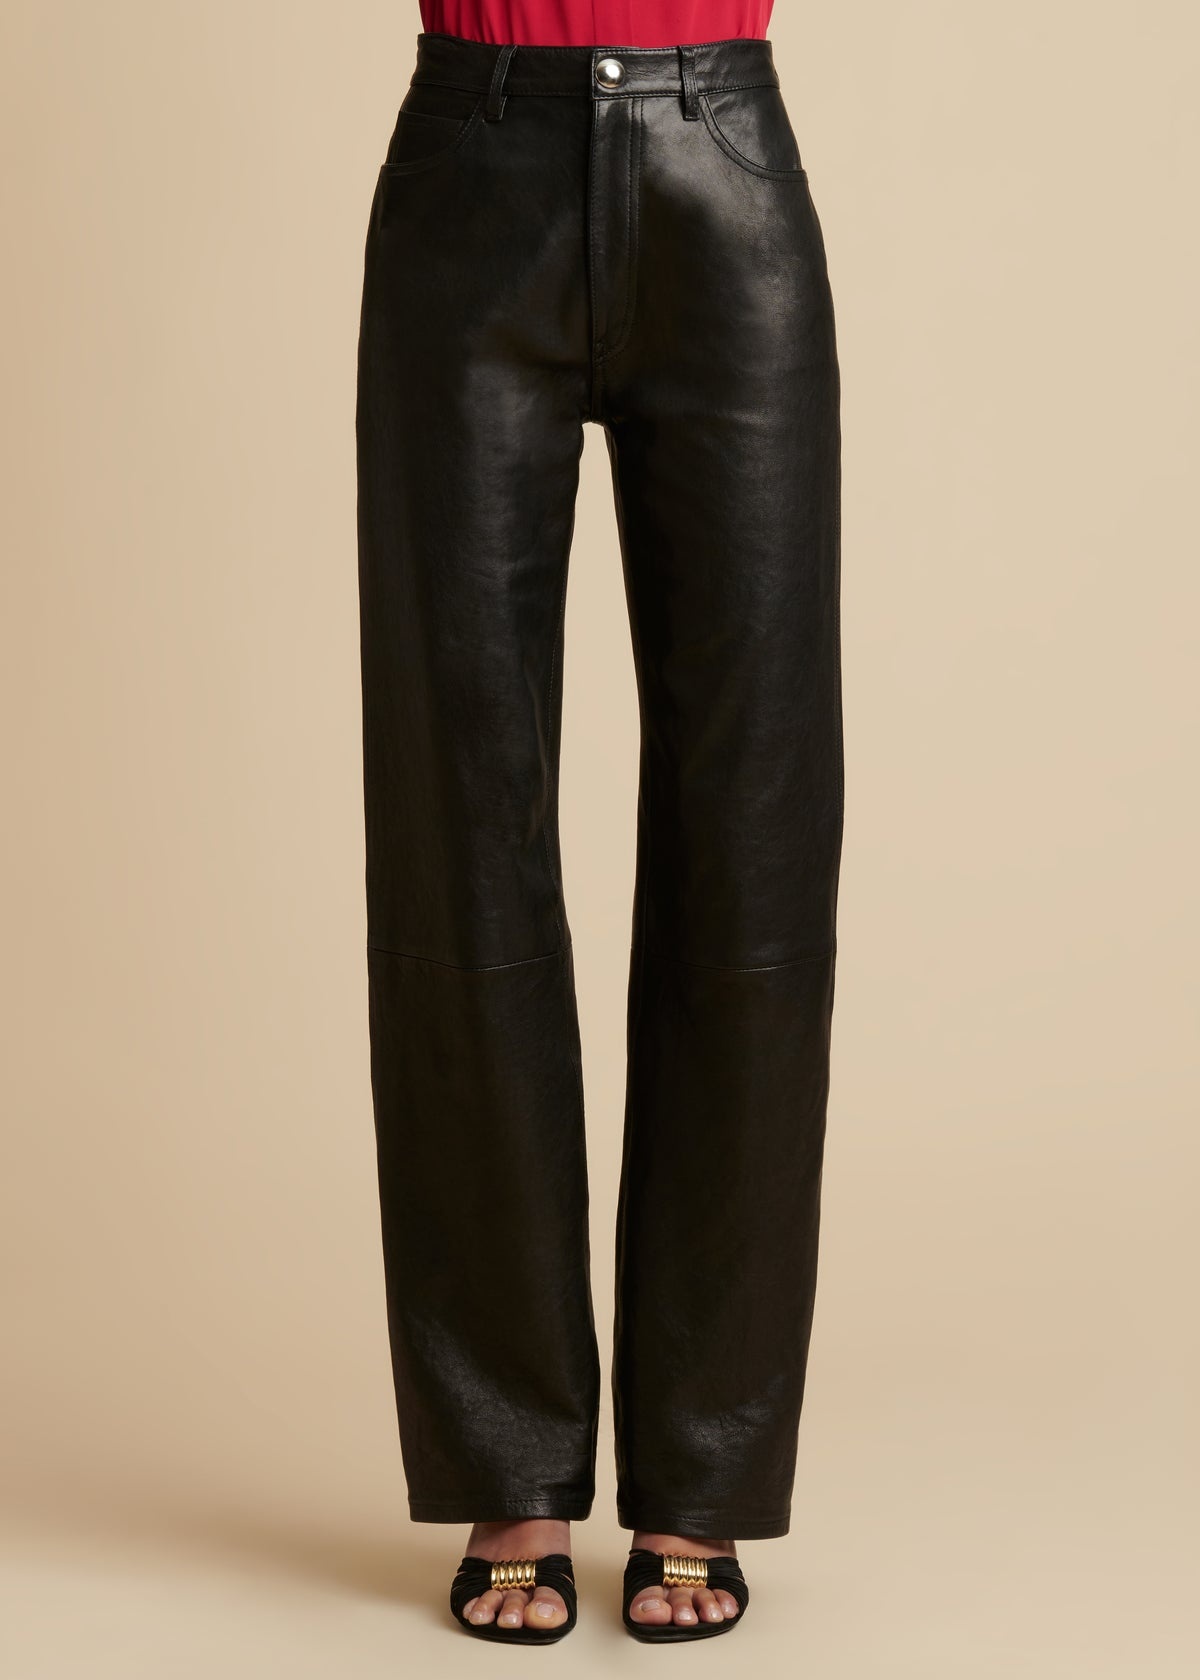 The Danielle Pant in Black Leather - 2